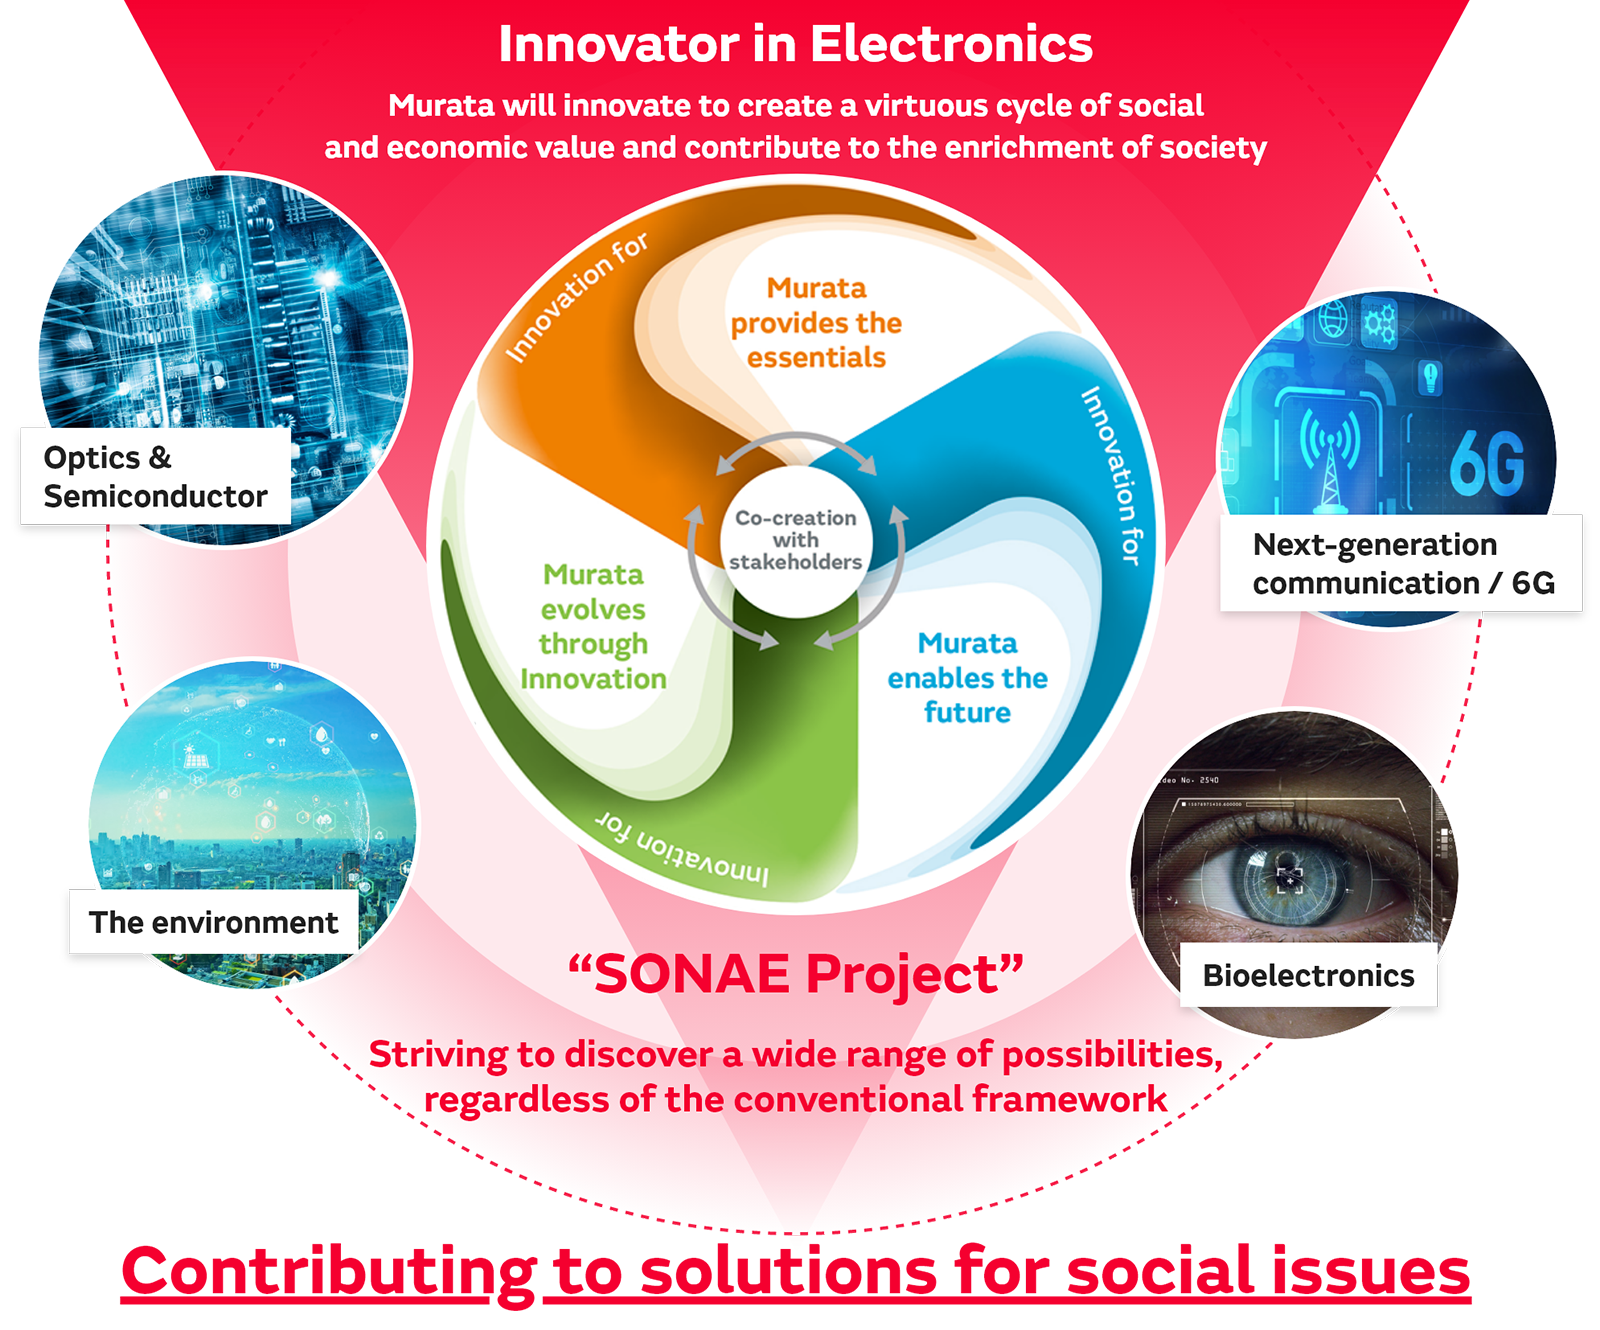 Striving to remain an innovator in electronics. Murata innovation can contribute to the realization of an affluent society by bringing about a virtuous cycle of social value and economic value. At present, we are focusing on the four themes of “next-generation communication / 6G,” “optics&Semiconductor,” “the environment,” and “bioelectronics,” undertaking investigative searching, research and development, and commercialization efforts aimed at technologies for the society of the 2030 and beyond.